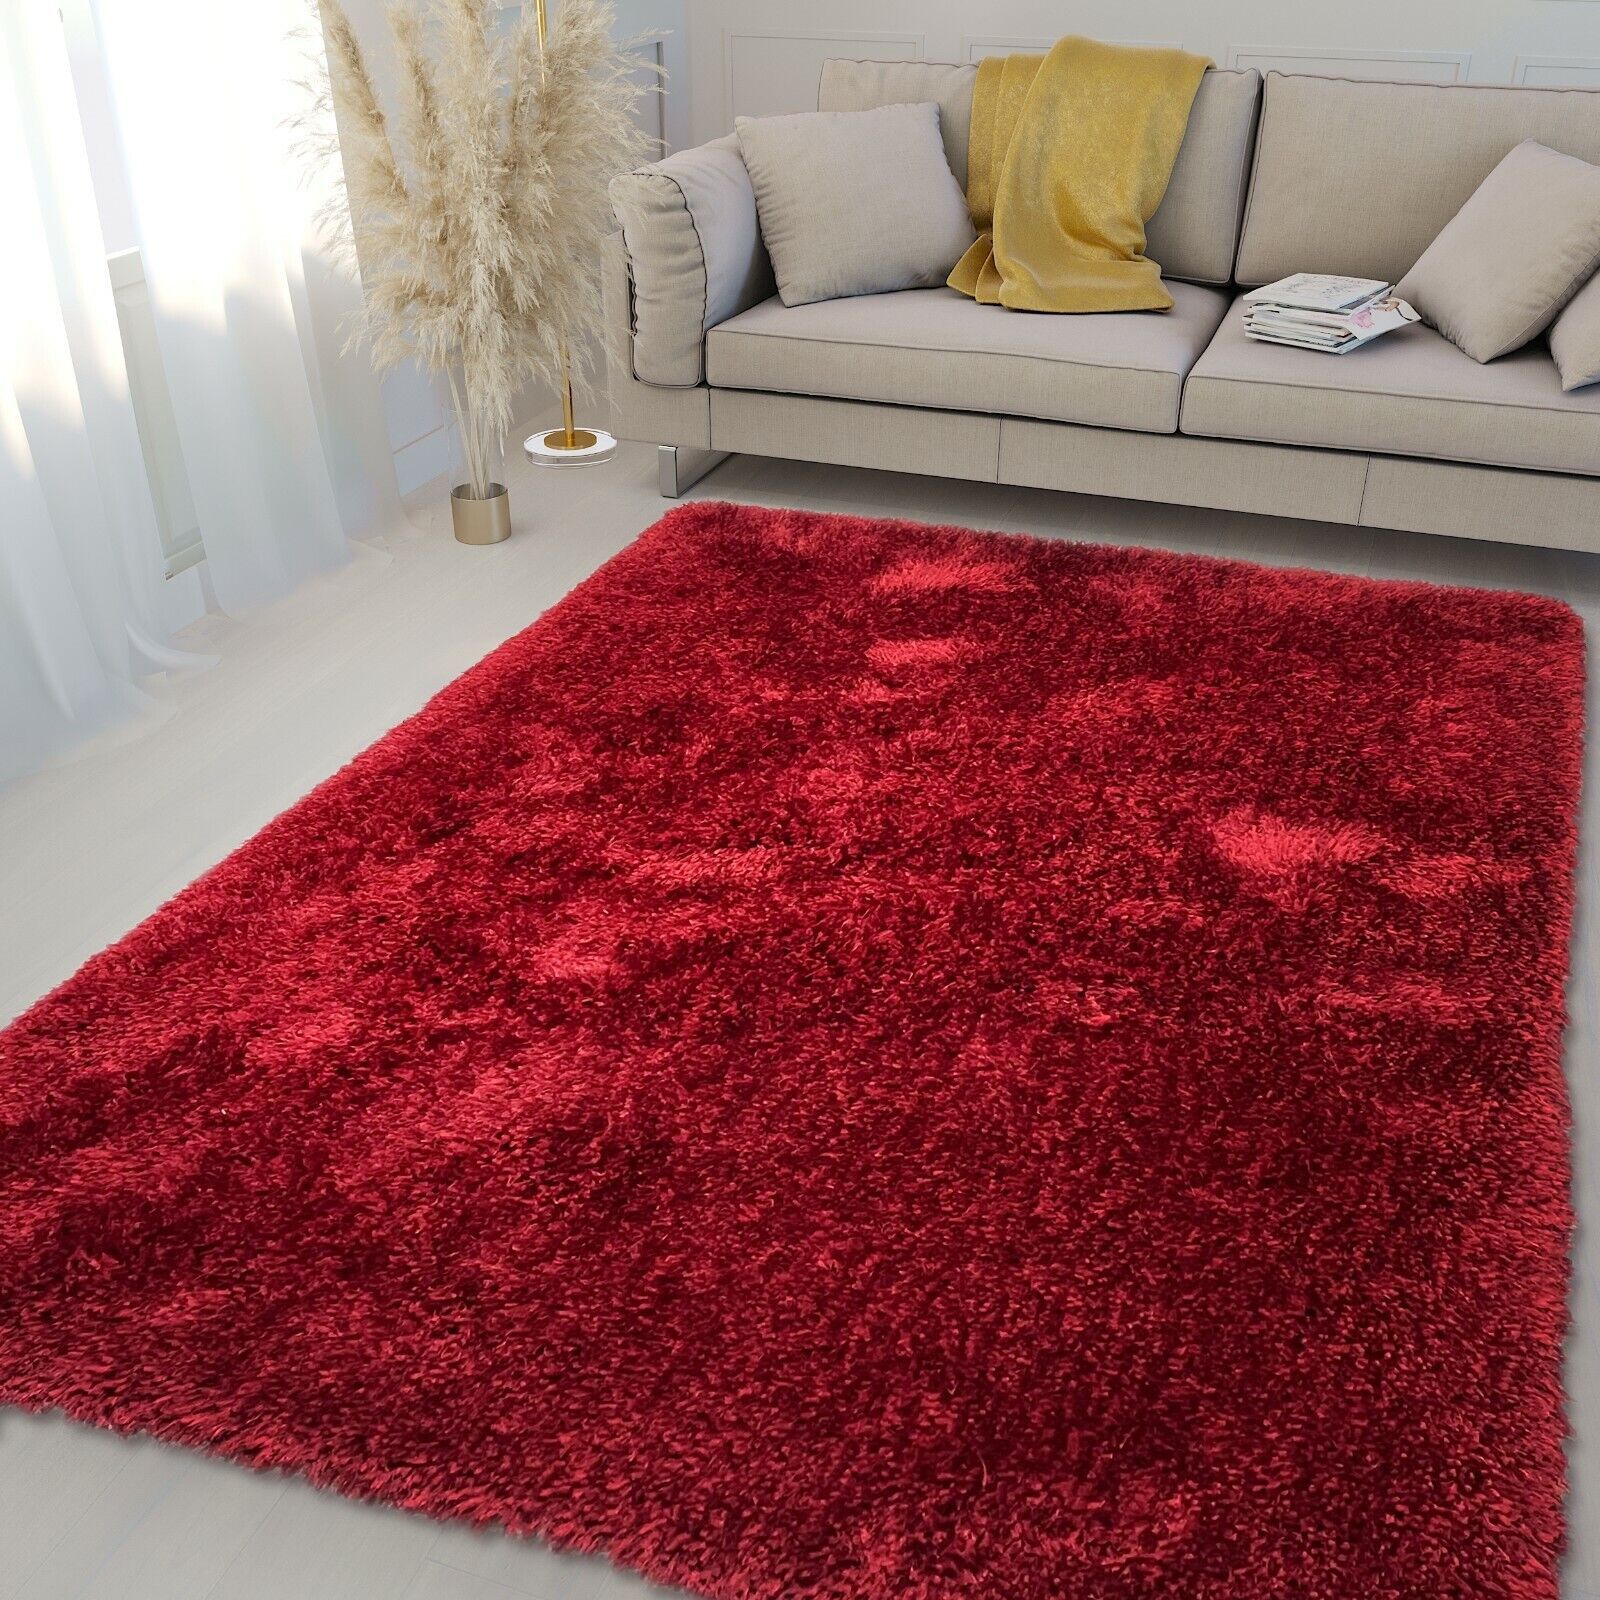 Red Shag Area Rug 5x7 Shaggy Carpet Solid Soft Plush Pile 749995692950 |  Ebay Intended For Red Solid Shag Rugs (Photo 14 of 15)